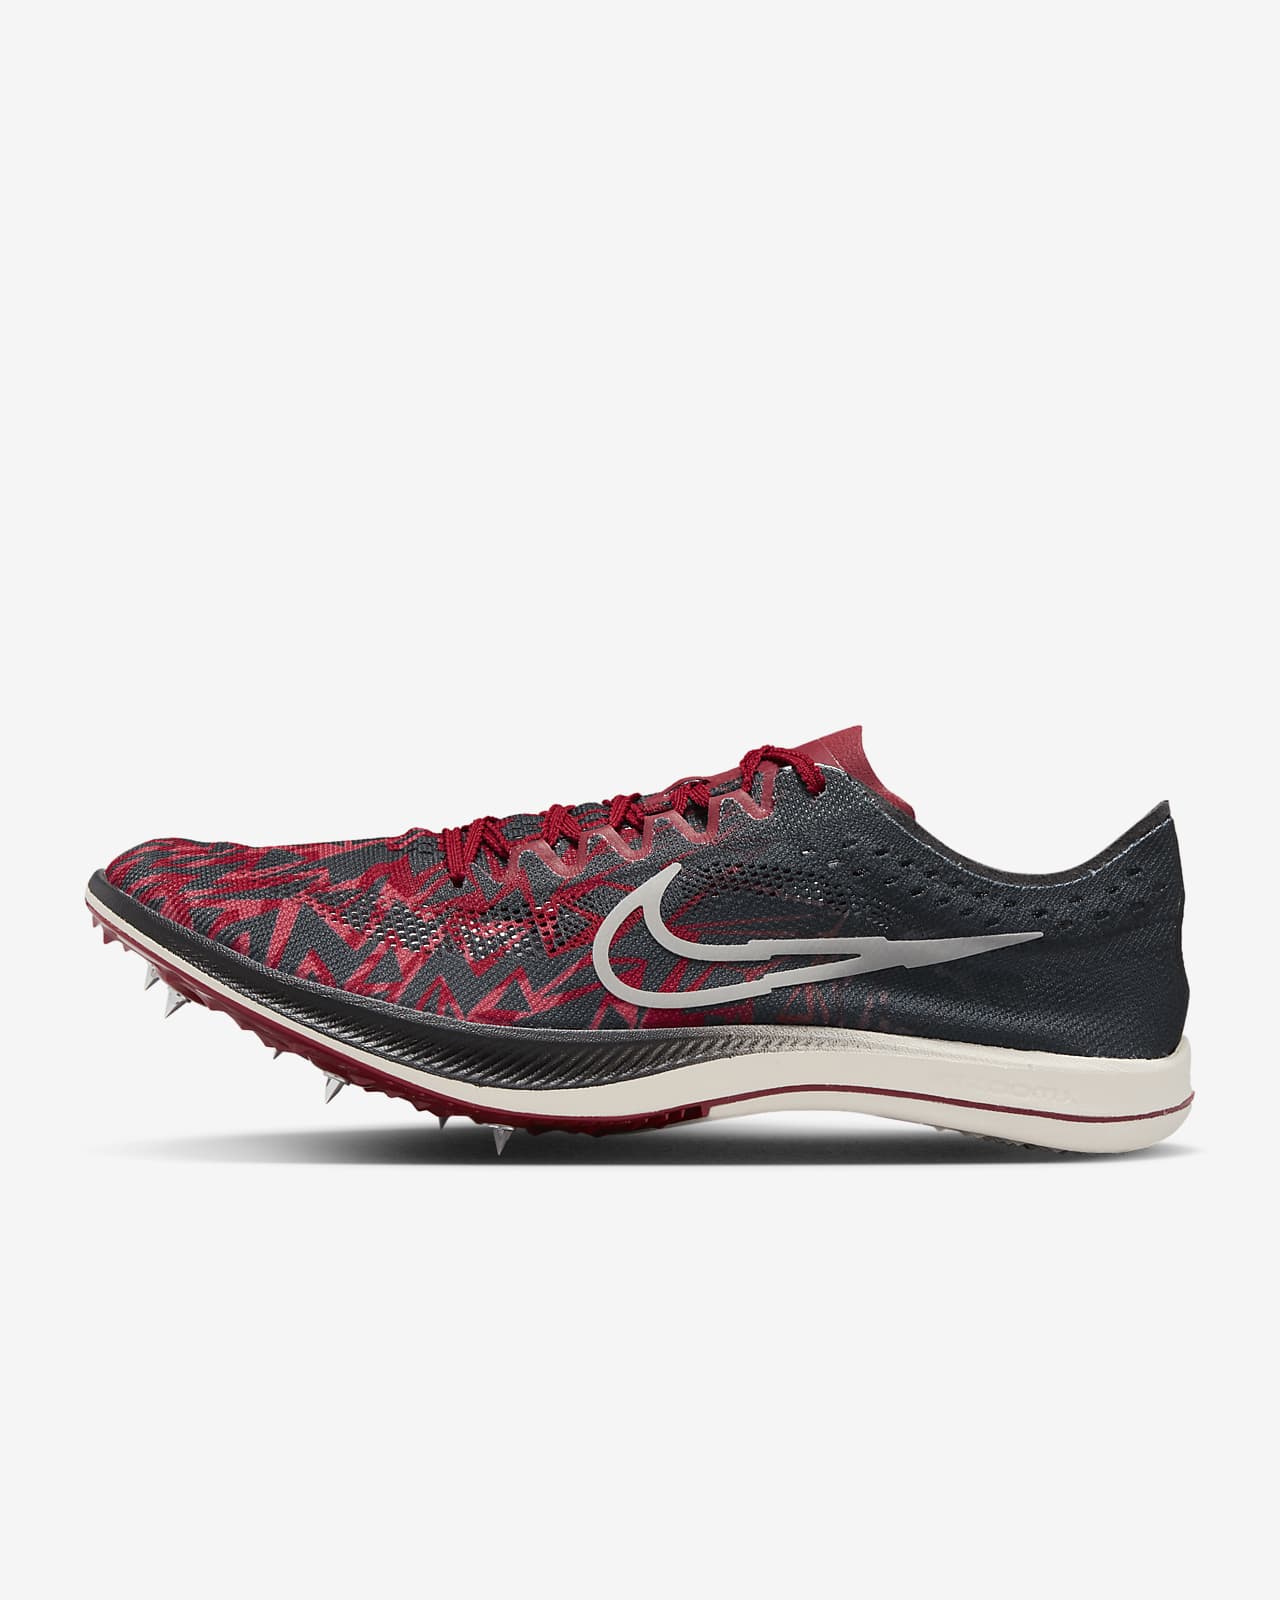 Nike Zoom Rival Multi Track and Field Shoes | Dick's Sporting Goods-vdbnhatranghotel.vn